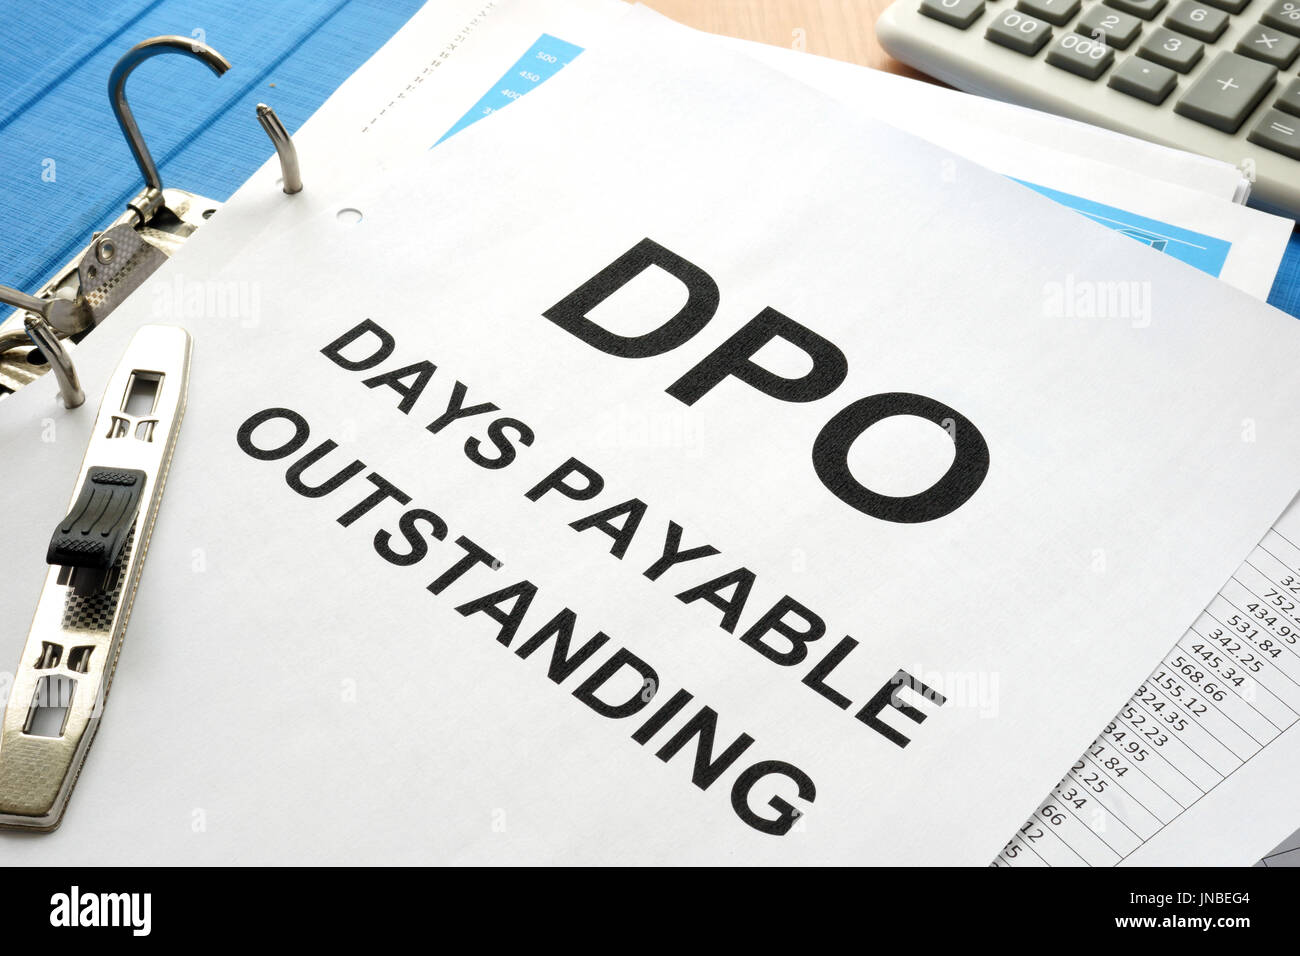 Pile of papers with title Days payable outstanding (DPO). Stock Photo